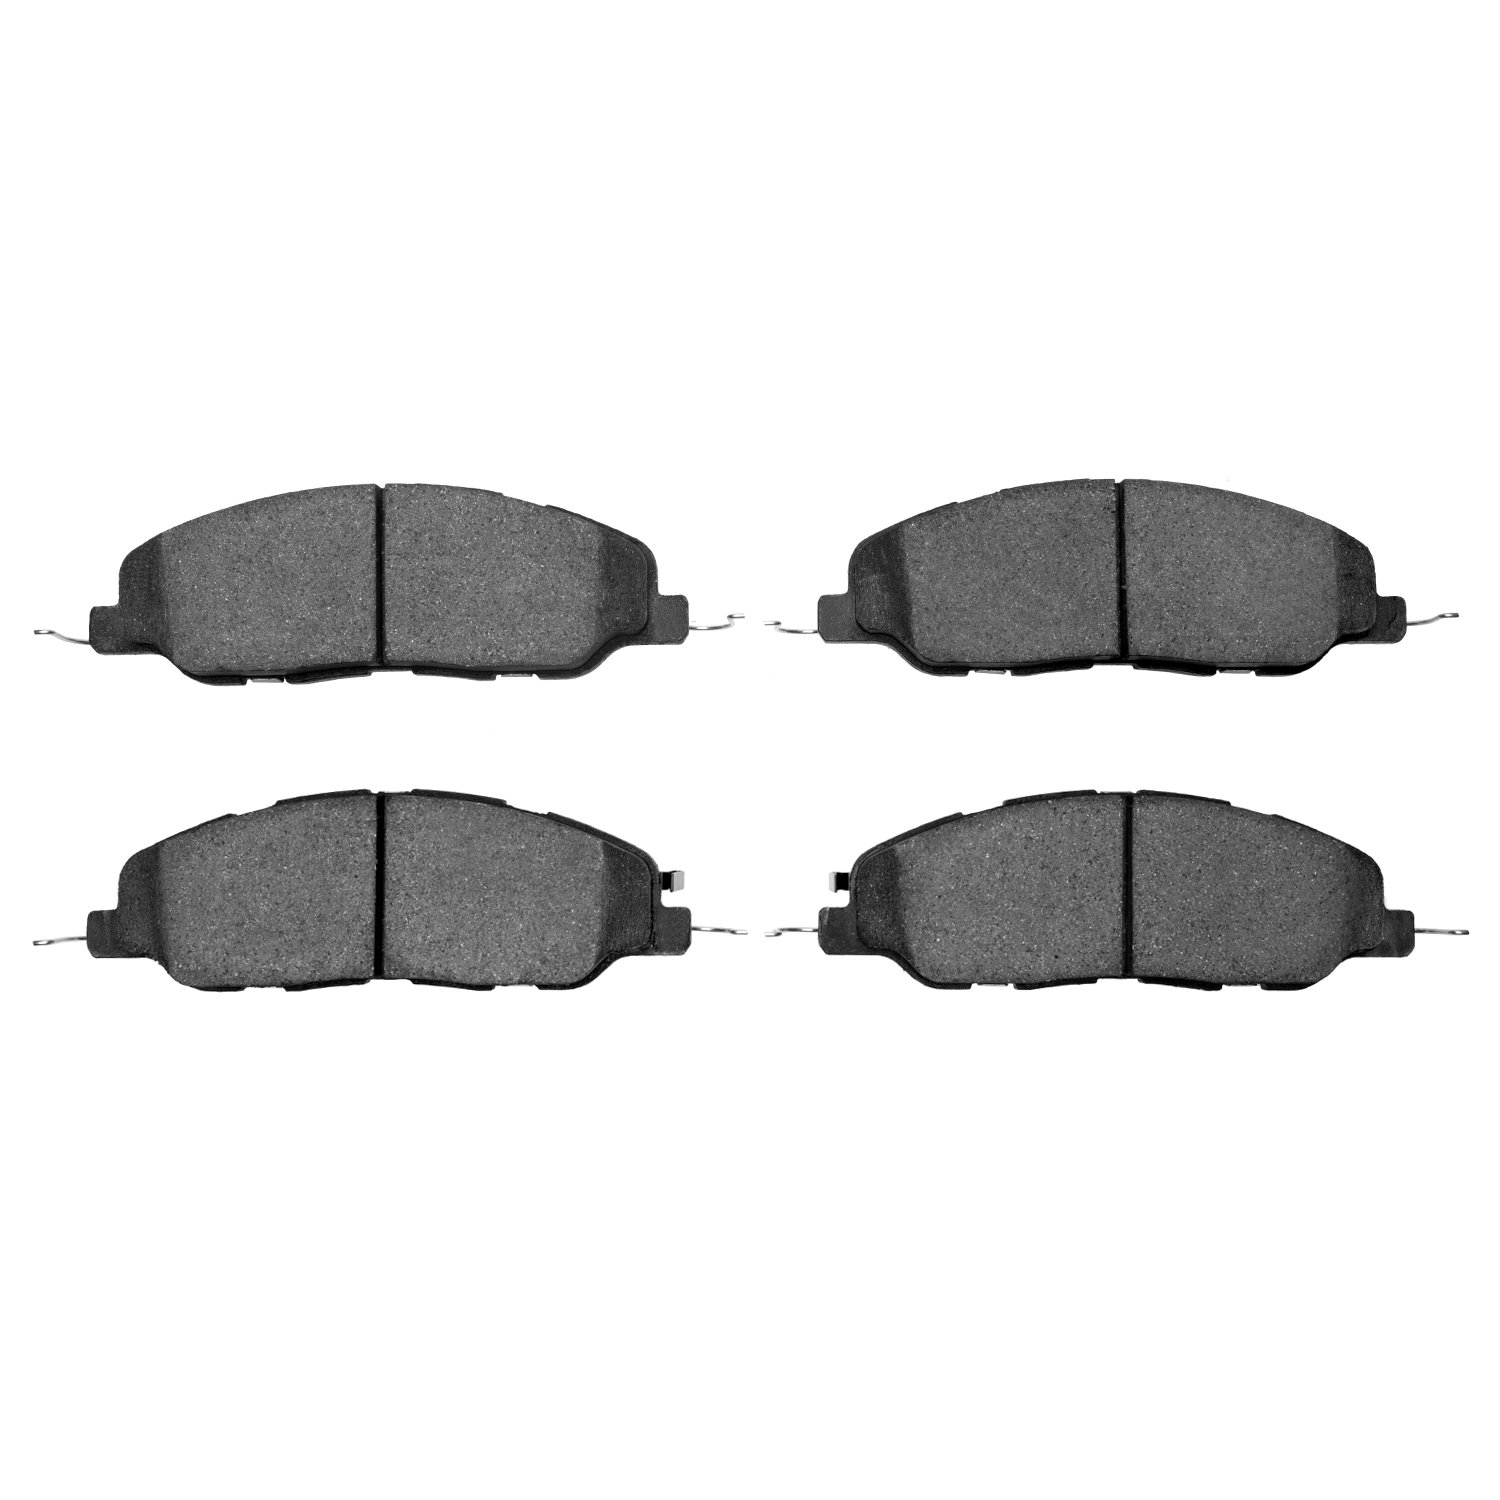 1000-1463-00 Track/Street Low-Metallic Brake Pads Kit, 2005-2014 Ford/Lincoln/Mercury/Mazda, Position: Front